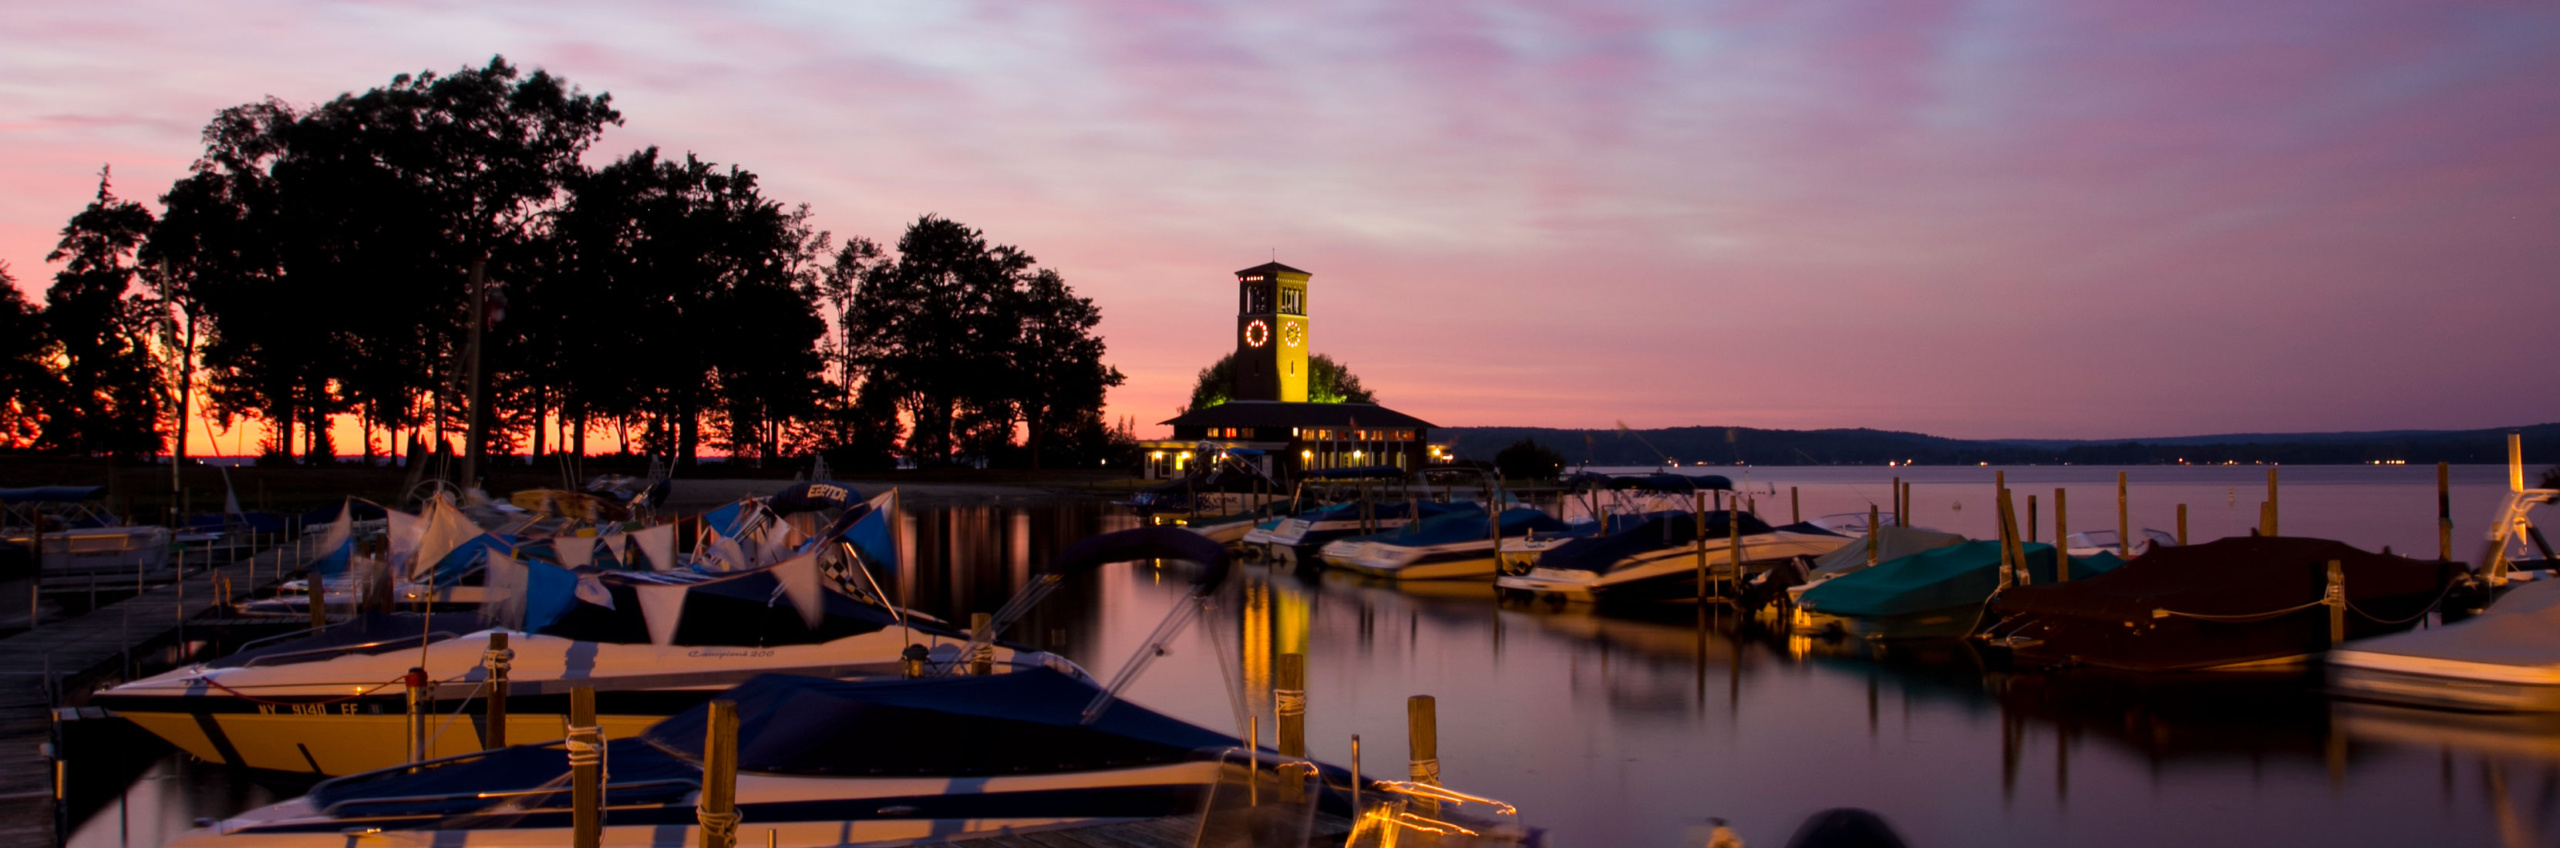 Miller Bell Tower and the docks at sunset on Chautauqua Lake